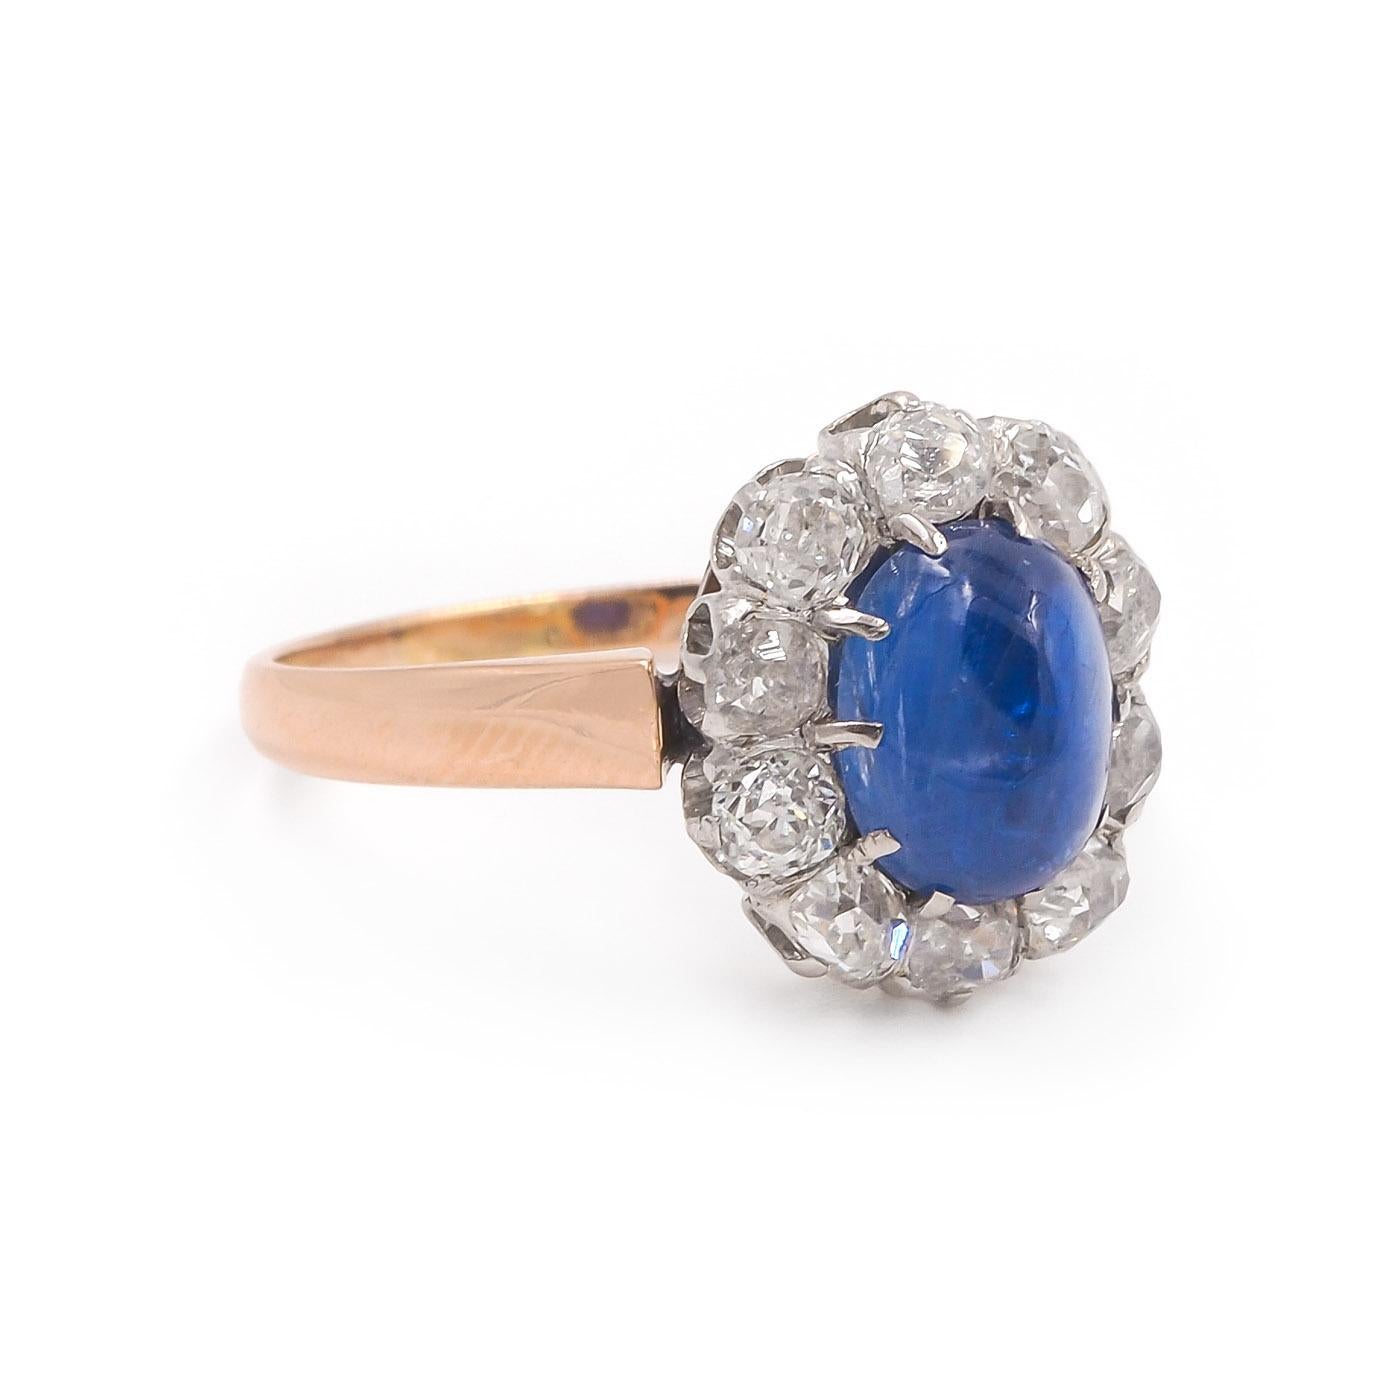 Edwardian era French import 2.40 Carat Oval Cabochon Sapphire & Old Mine Cut Diamond Cluster Engagement Ring, composed of 18k rose gold & platinum. The 2.40 carat Oval Cabochon blue sapphire is AGL certified, from Burma and is Unheated. With an